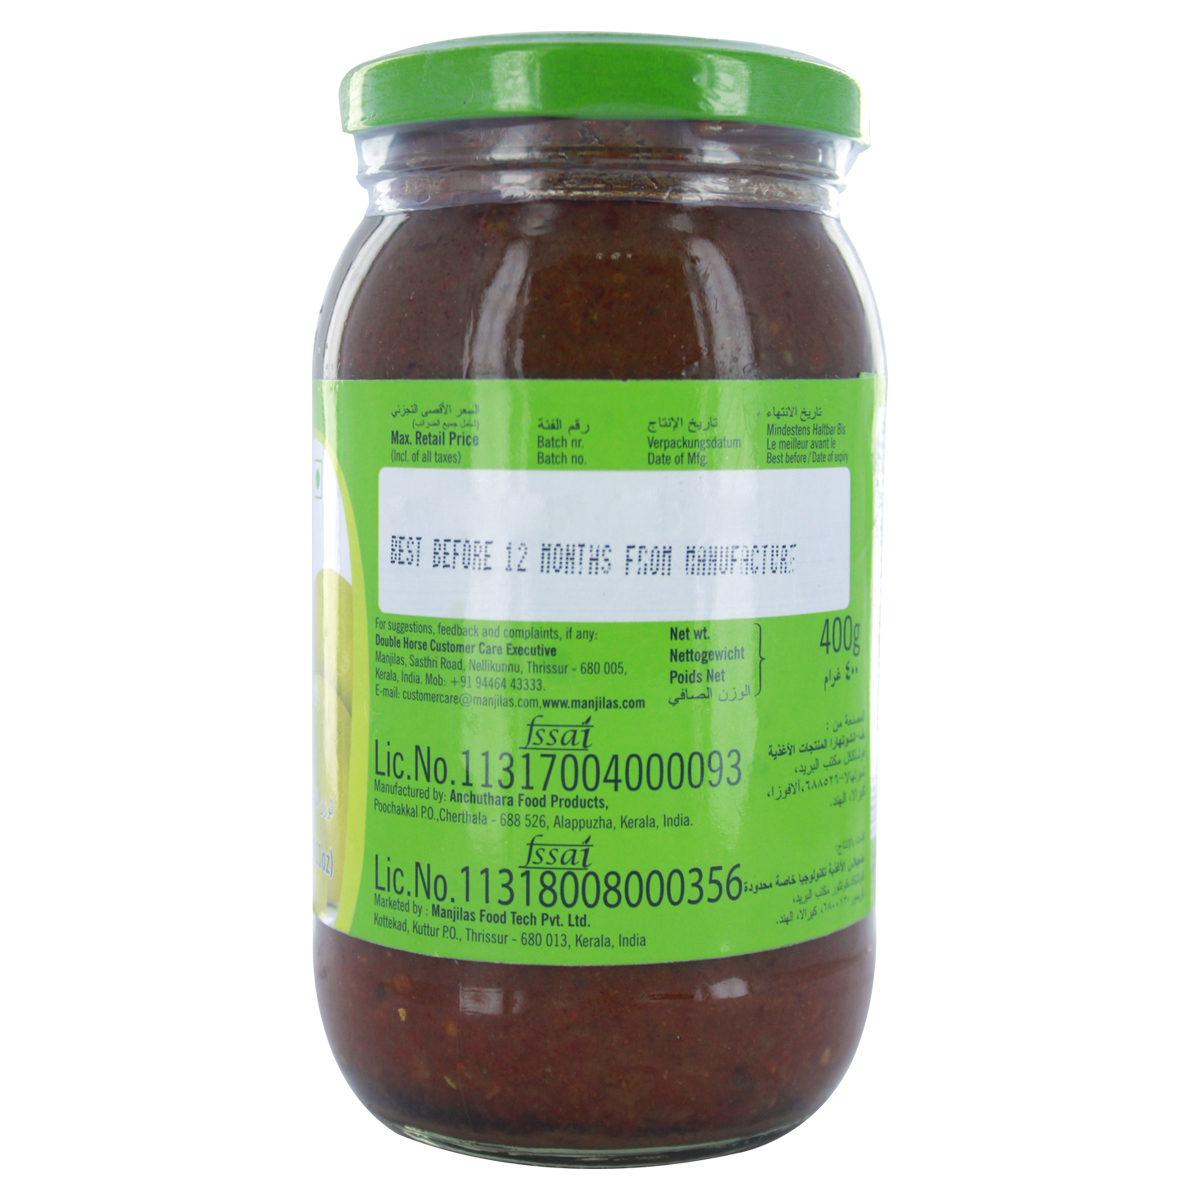 Double Horse Lime Pickle 400g